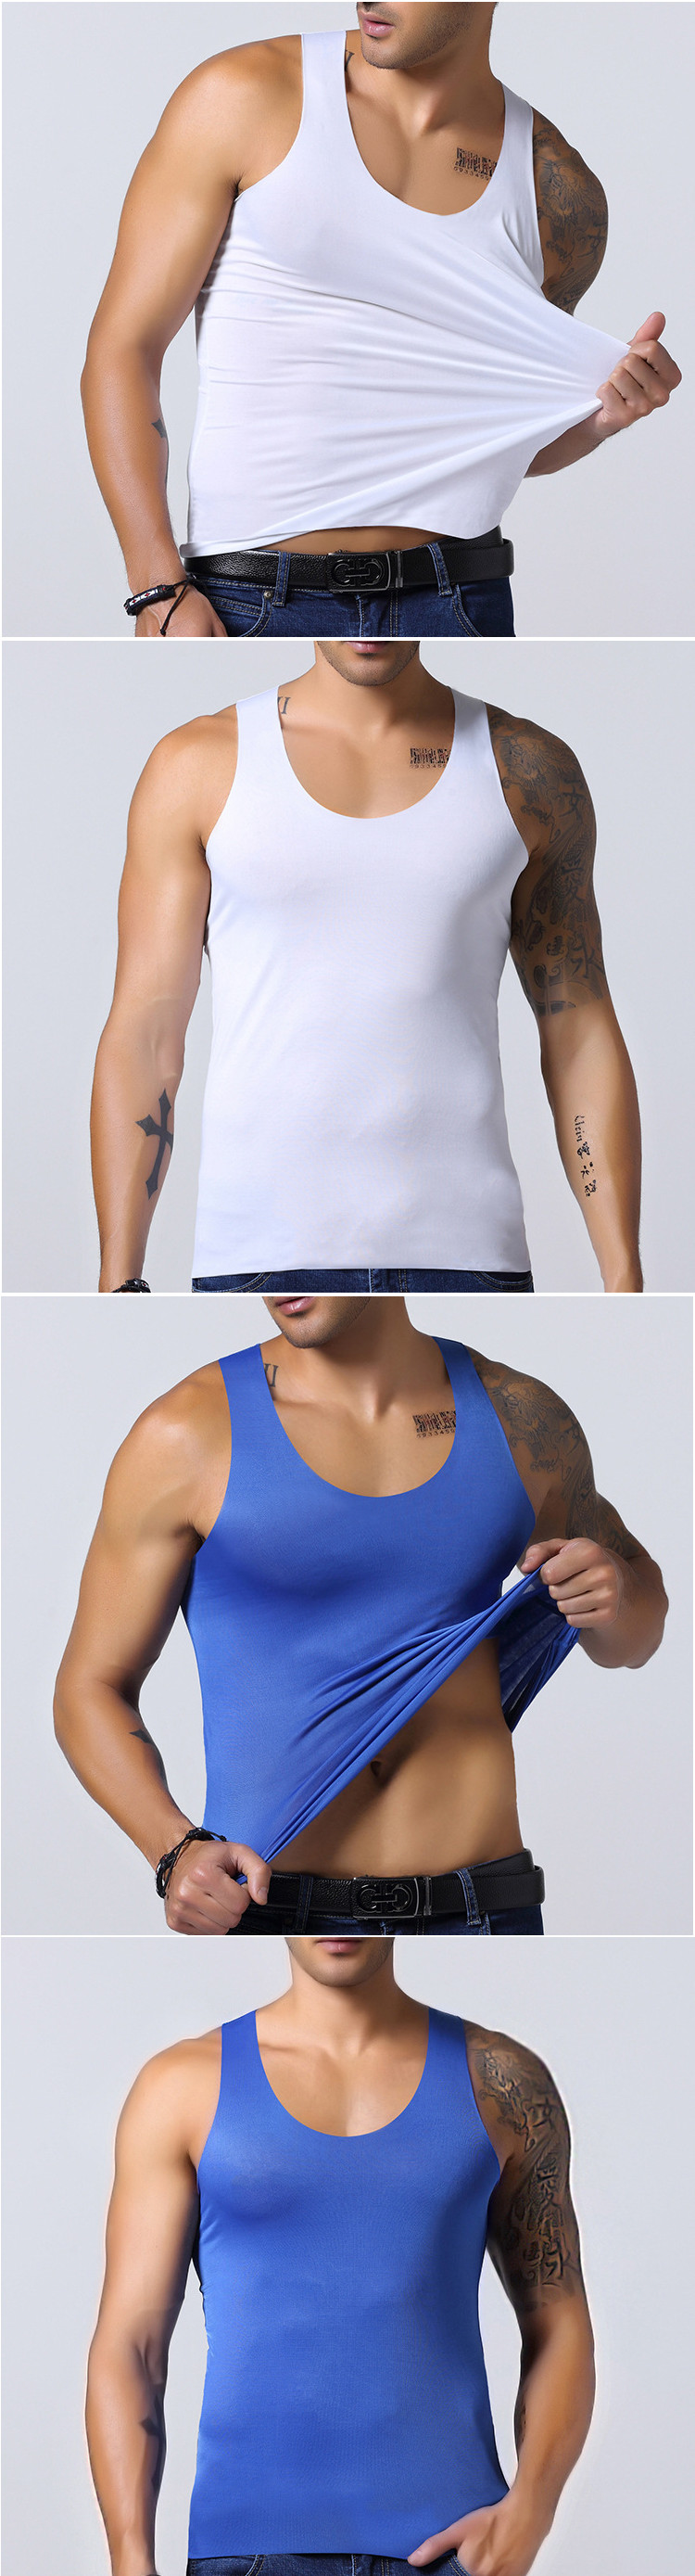 Mens-Seamless-Ice-Silk-Vest-Leisure-Solid-Color-Thin-Elastic-Fitness-Sports-Tanks-Tops-1177653